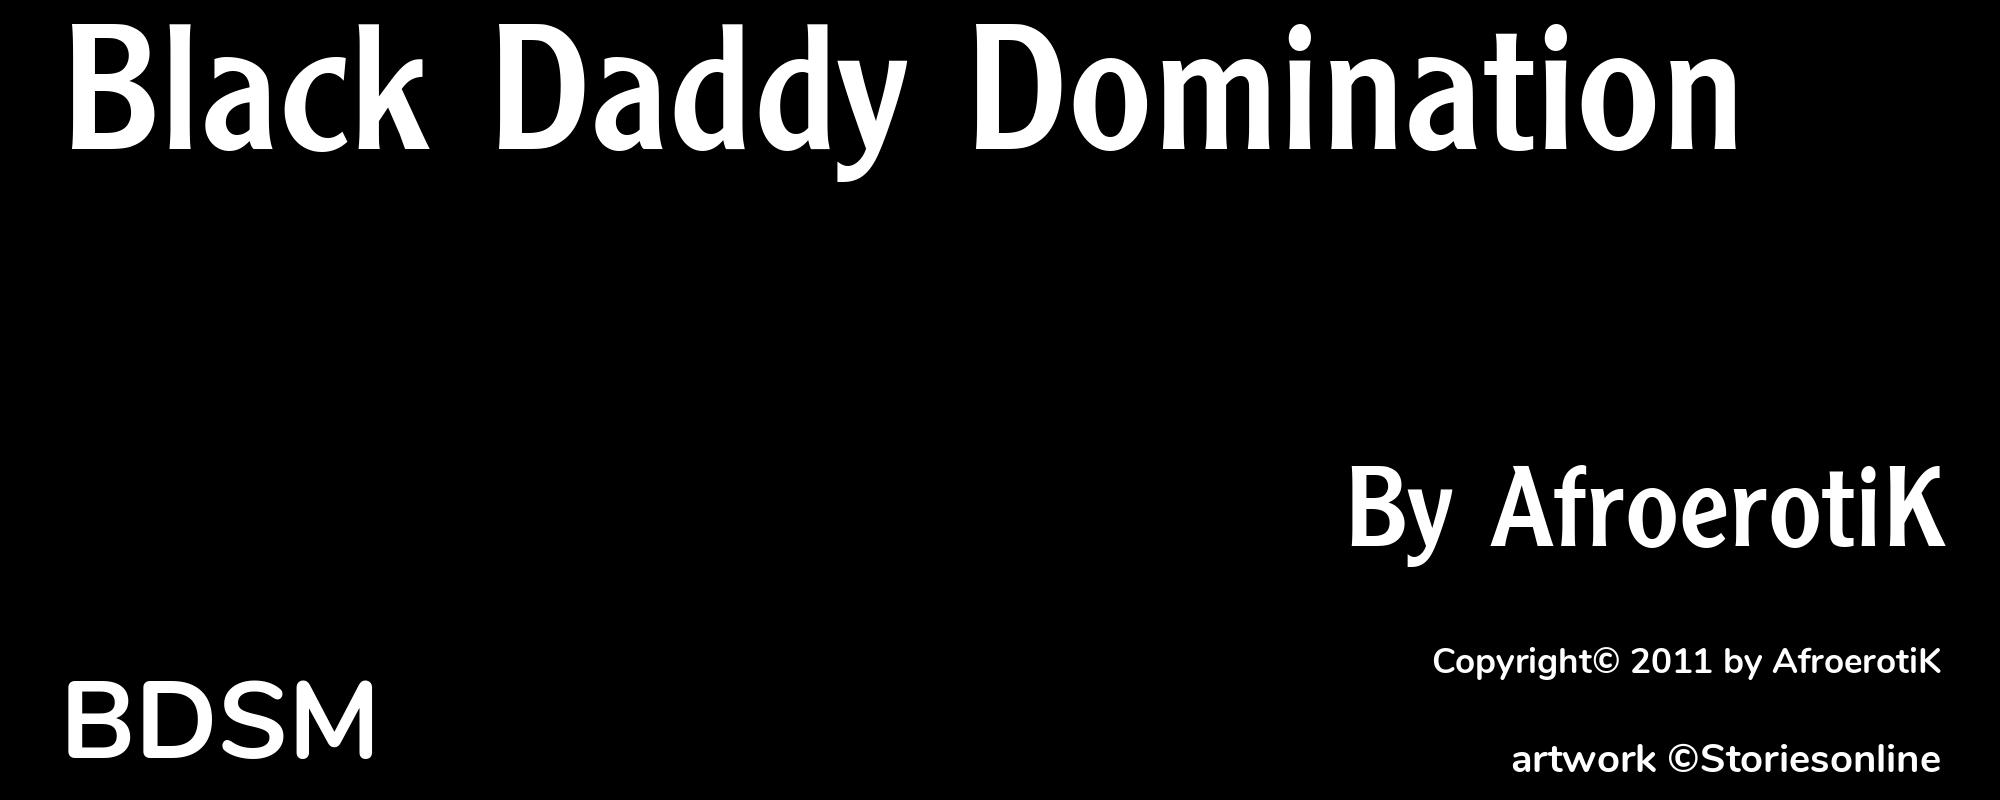 Black Daddy Domination - Cover